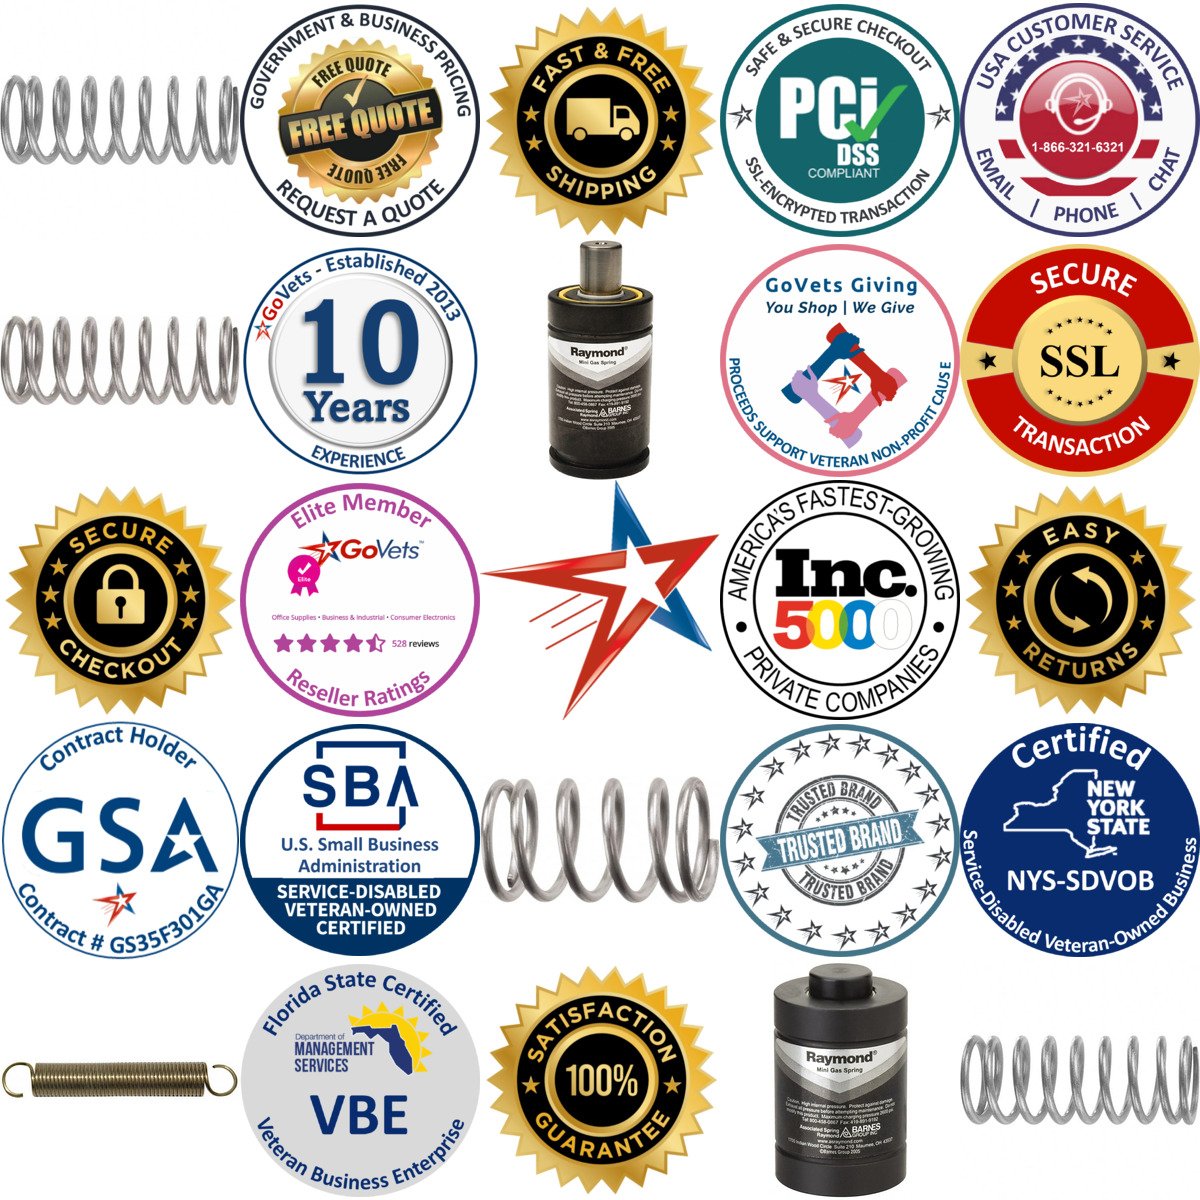 A selection of Shock Absorbers and Springs products on GoVets